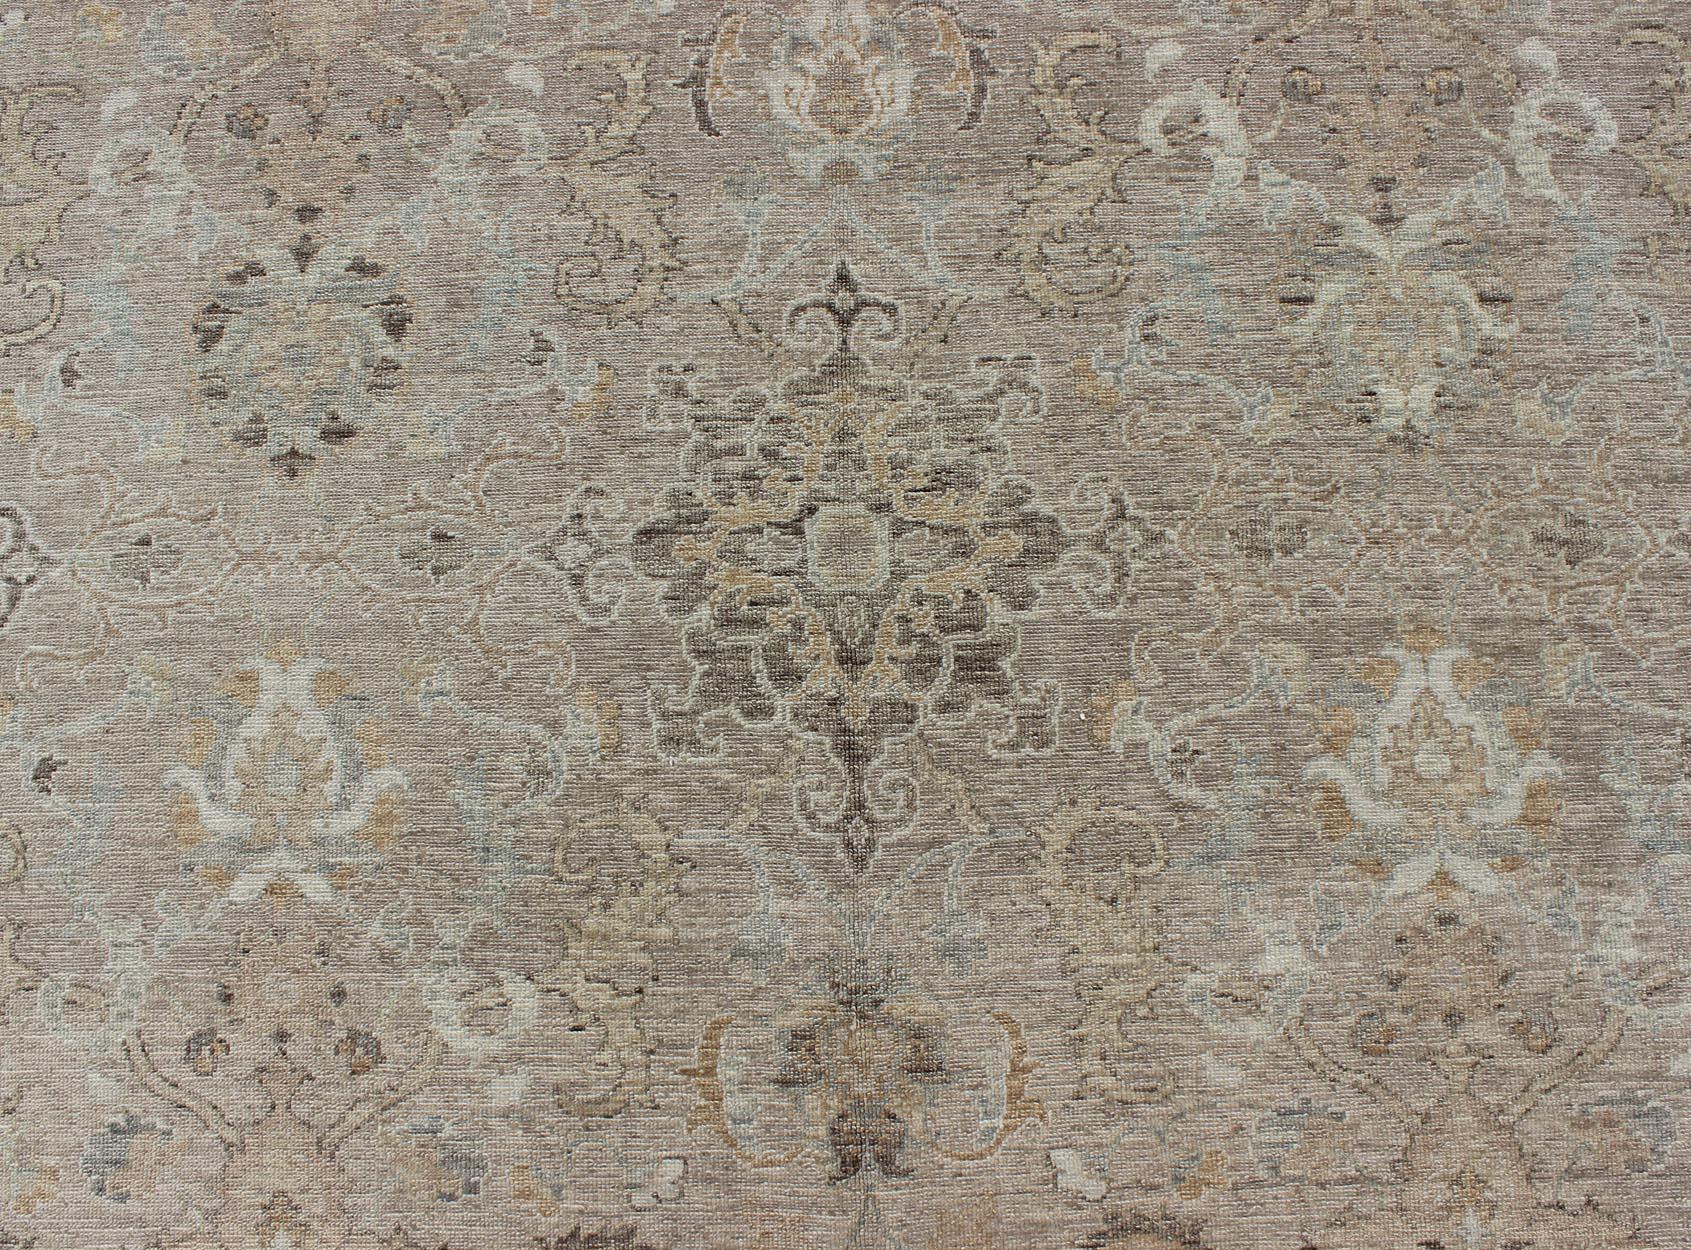 Wool Turkish Sivas Fine Weave Rug in Taupe, Gray, Ivory and Brown and Cream Colors For Sale